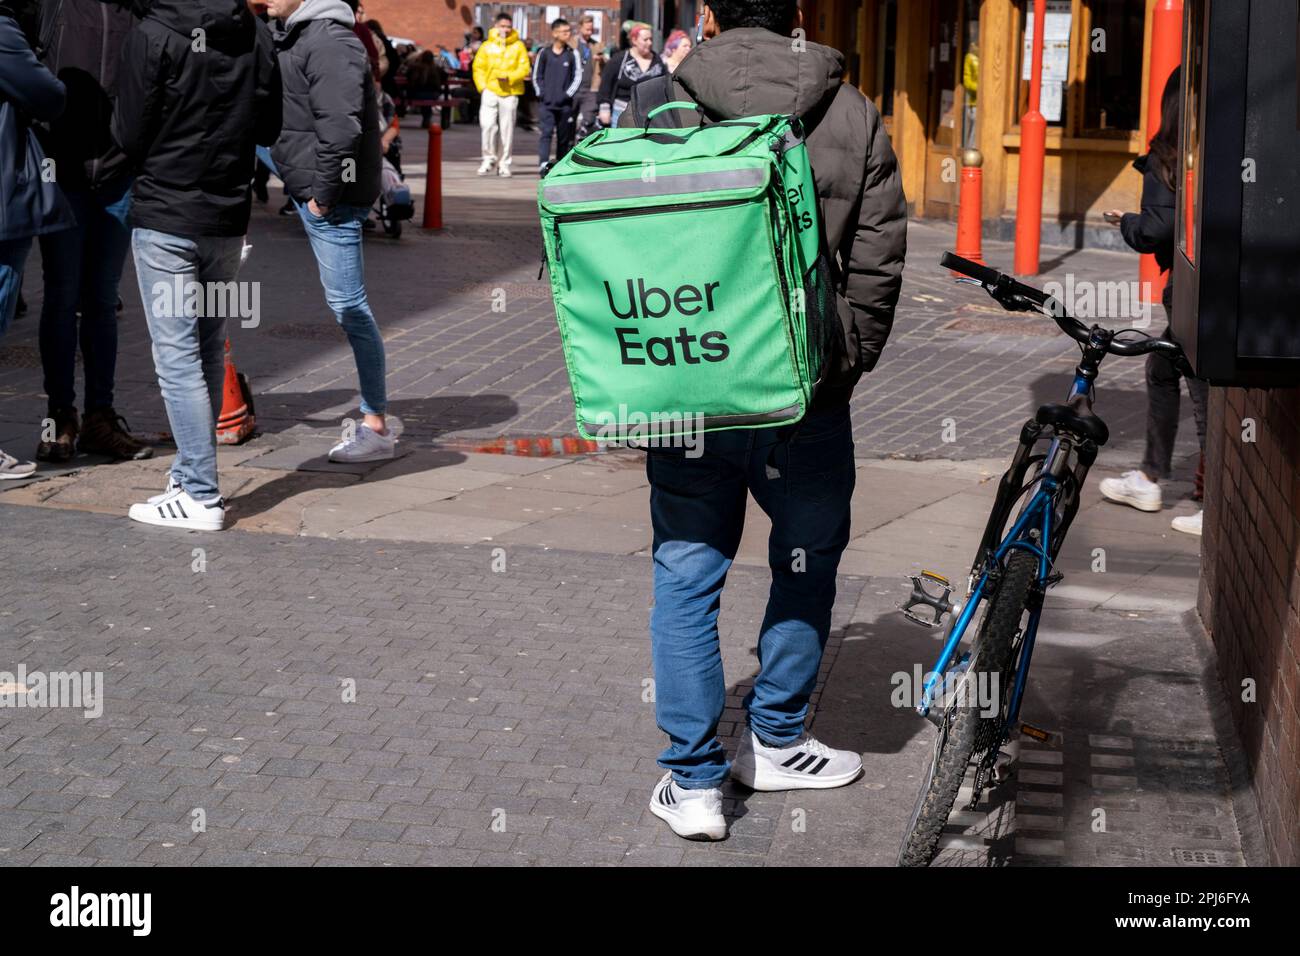 Uber Eats takeaway delivery cycle courier on 30th March 2023 in London, United Kingdom. Uber Eats is an online food ordering and delivery platform launched by Uber in 2014. It acts as an intermediary between independent takeaway food outlets and customers, with thousands of cycle couriers delivering food by bicycle and other forms of transport. Gig workers are independent contractors, online platform workers, contract firm workers, on-call workers and temporary workers. Gig workers enter into formal agreements with on-demand companies to provide services to the companys clients. Stock Photo